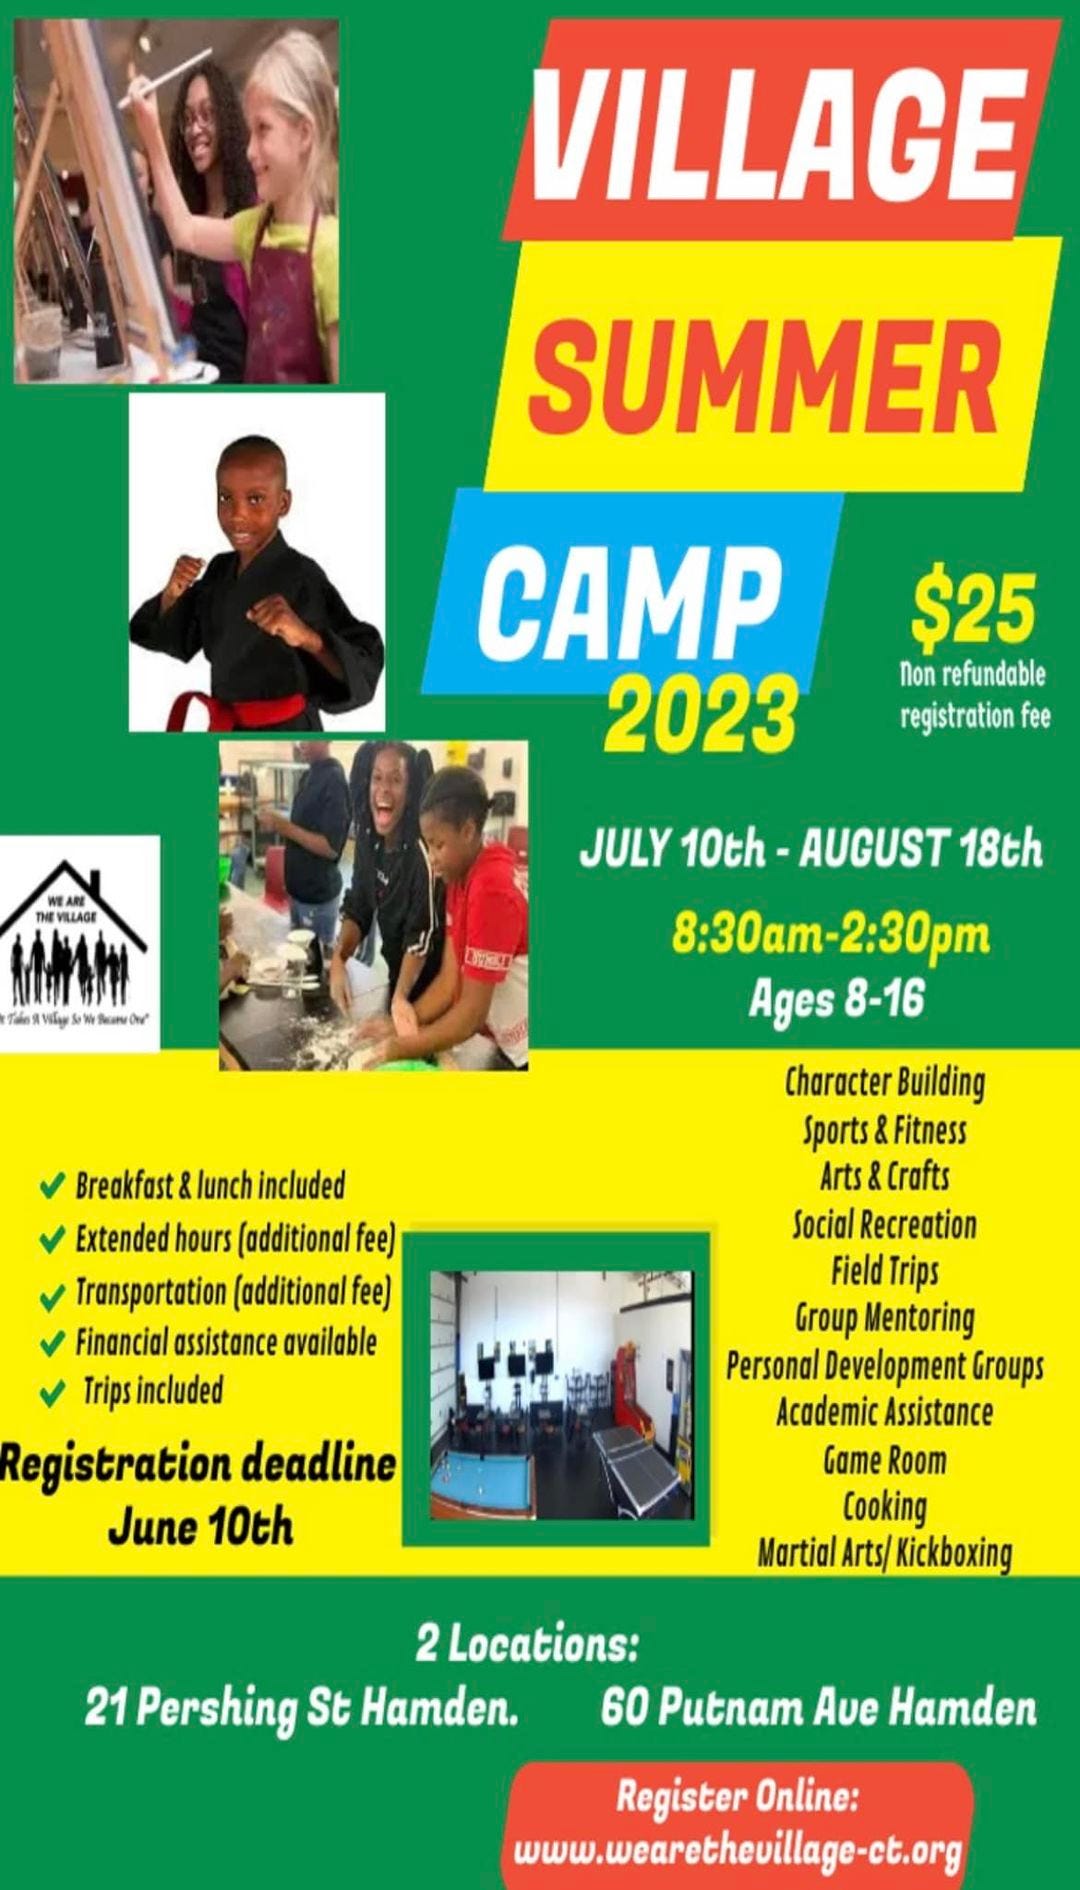 May be an image of 6 people and text that says 'VILLAGE SUMMER CAMP 2023 $25 Non refundable registrationfee VILLAGE JULY 10th AUGUST 18th 8:30am-2:30pm 8:30am- Ages 8-16 Breakfast lunch included Extended hours (additional fee) ansportation (additional fee) Financial assistance available Trips included Registration deadline June 10th Character Building Sports Fitness Arts Crafts Social Recreation Field Trips Group Mentoring Personal Development Groups Academic Assistance Game Room Cooking Martial Arts/ Kickboxing 2 Locations: 21 Pershing StHamden. 60 Putnam Aue Hamden Register Online: www.wearethevillage.ct.org'